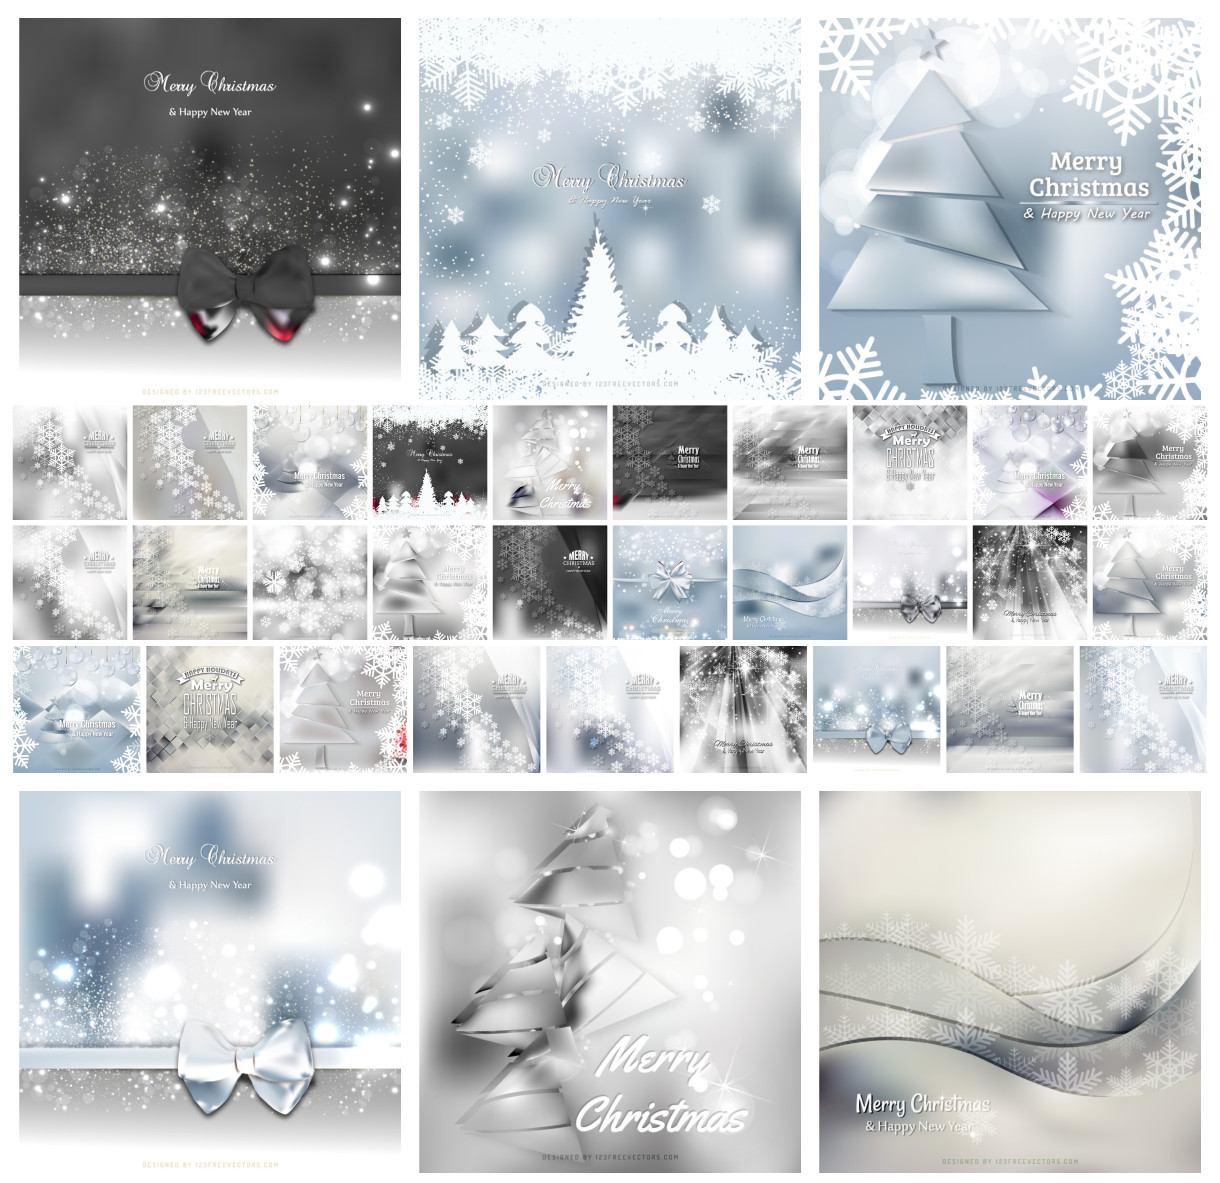 Embrace the Season: 35 Grey Christmas Backgrounds for Your Greeting Cards and Decor